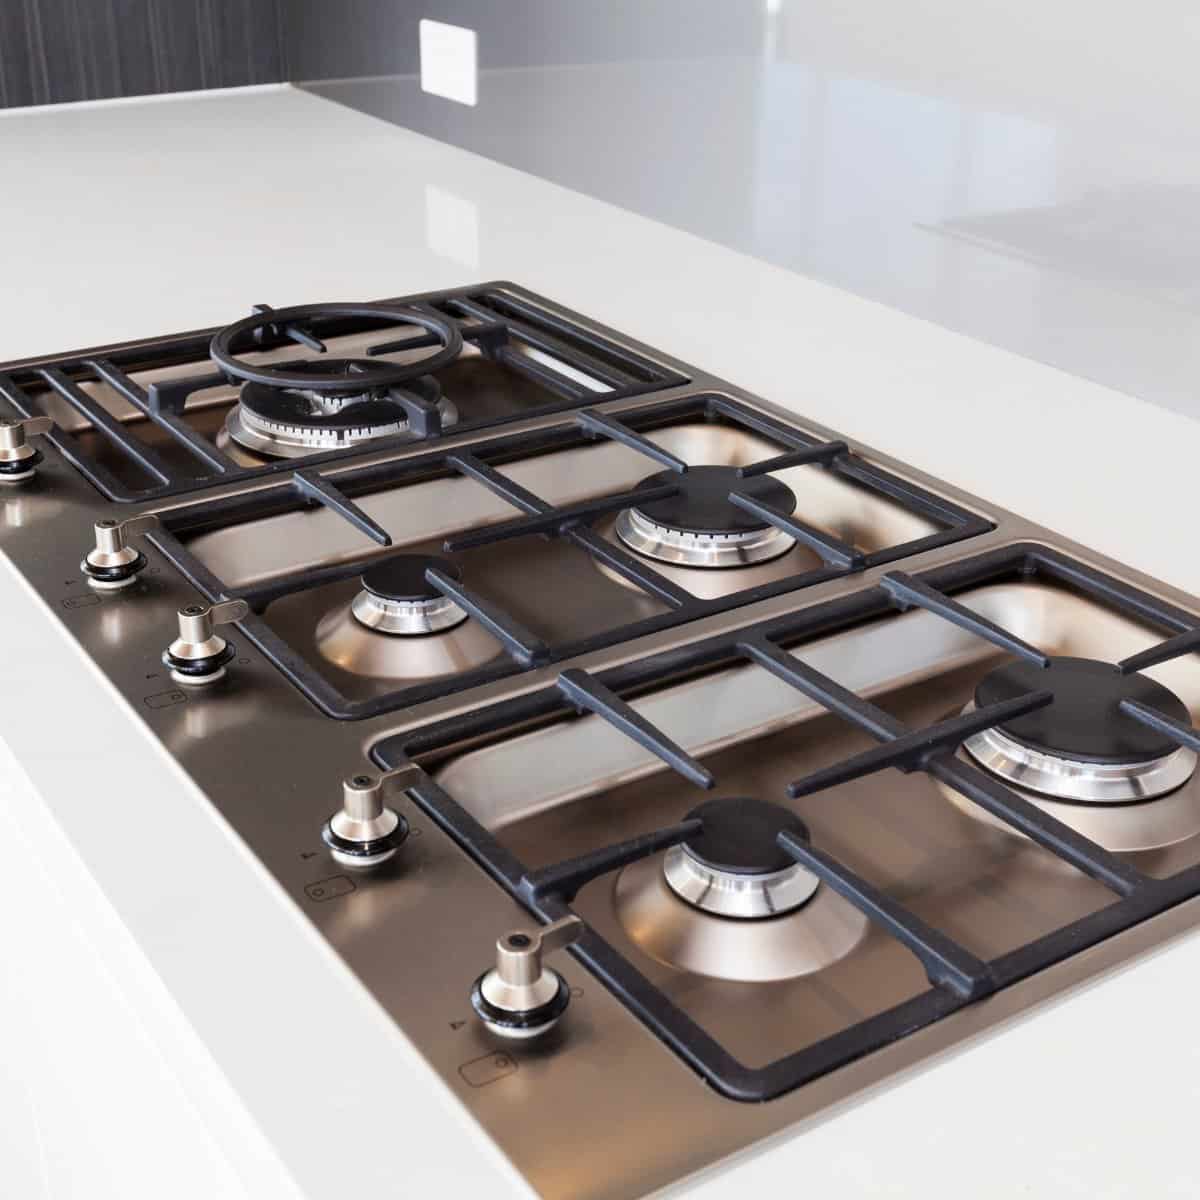 What is a cooktop